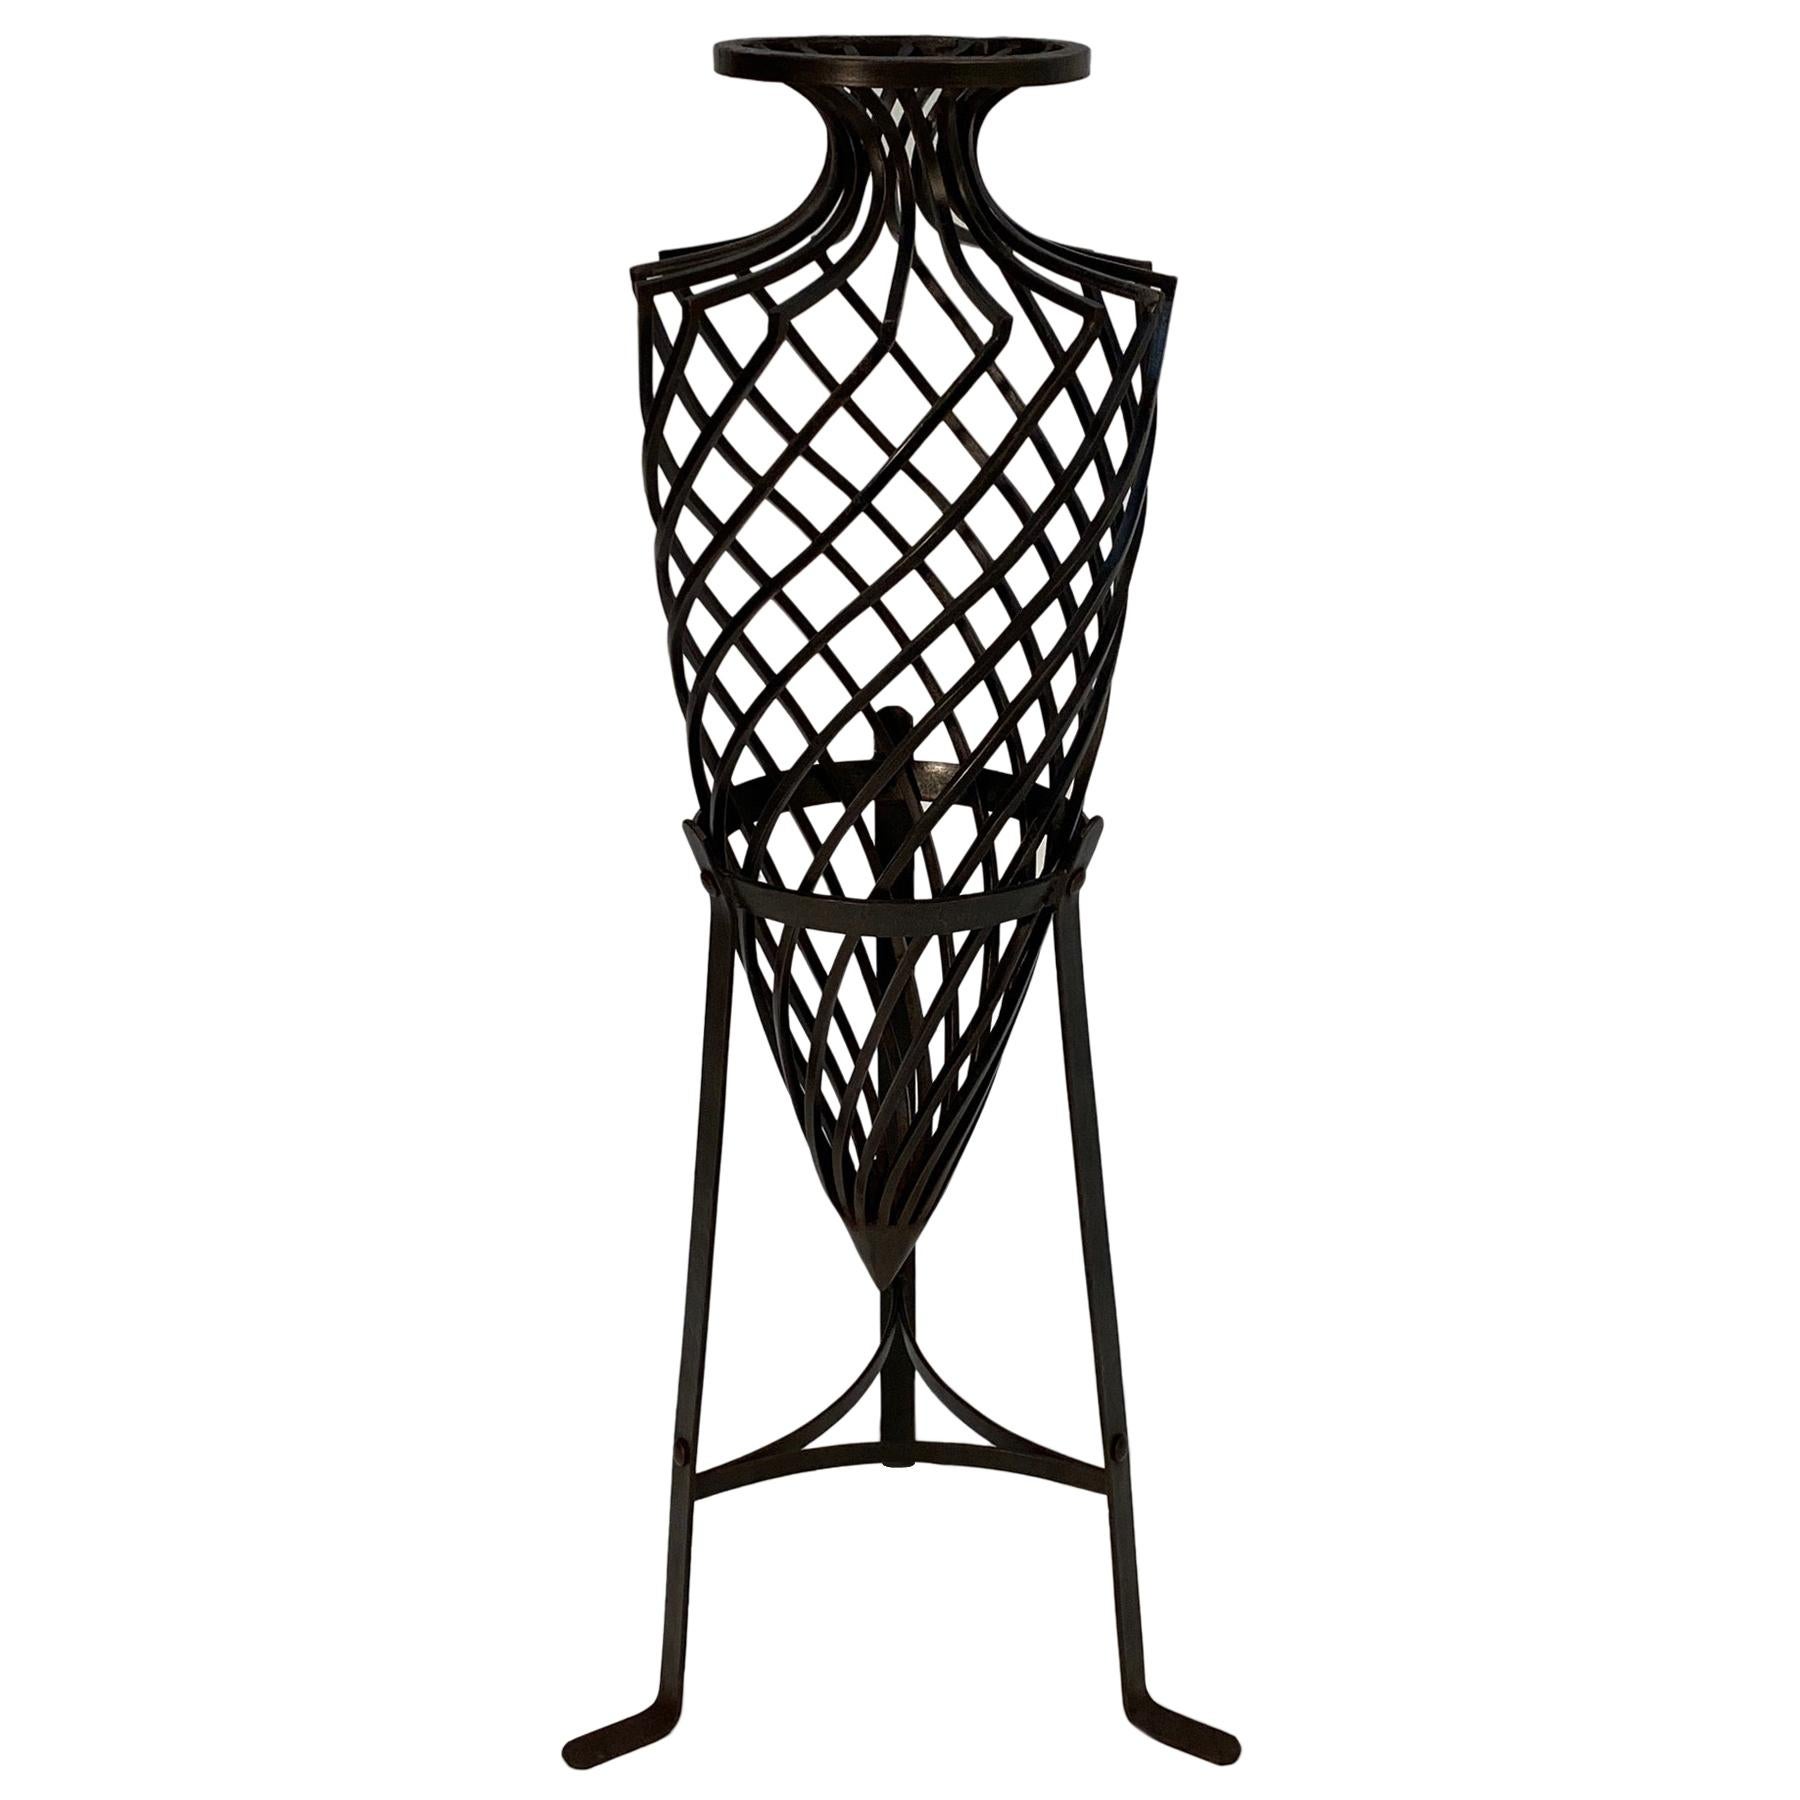 Striking Sculptural Wrought Iron Grecian Urn on Stand For Sale